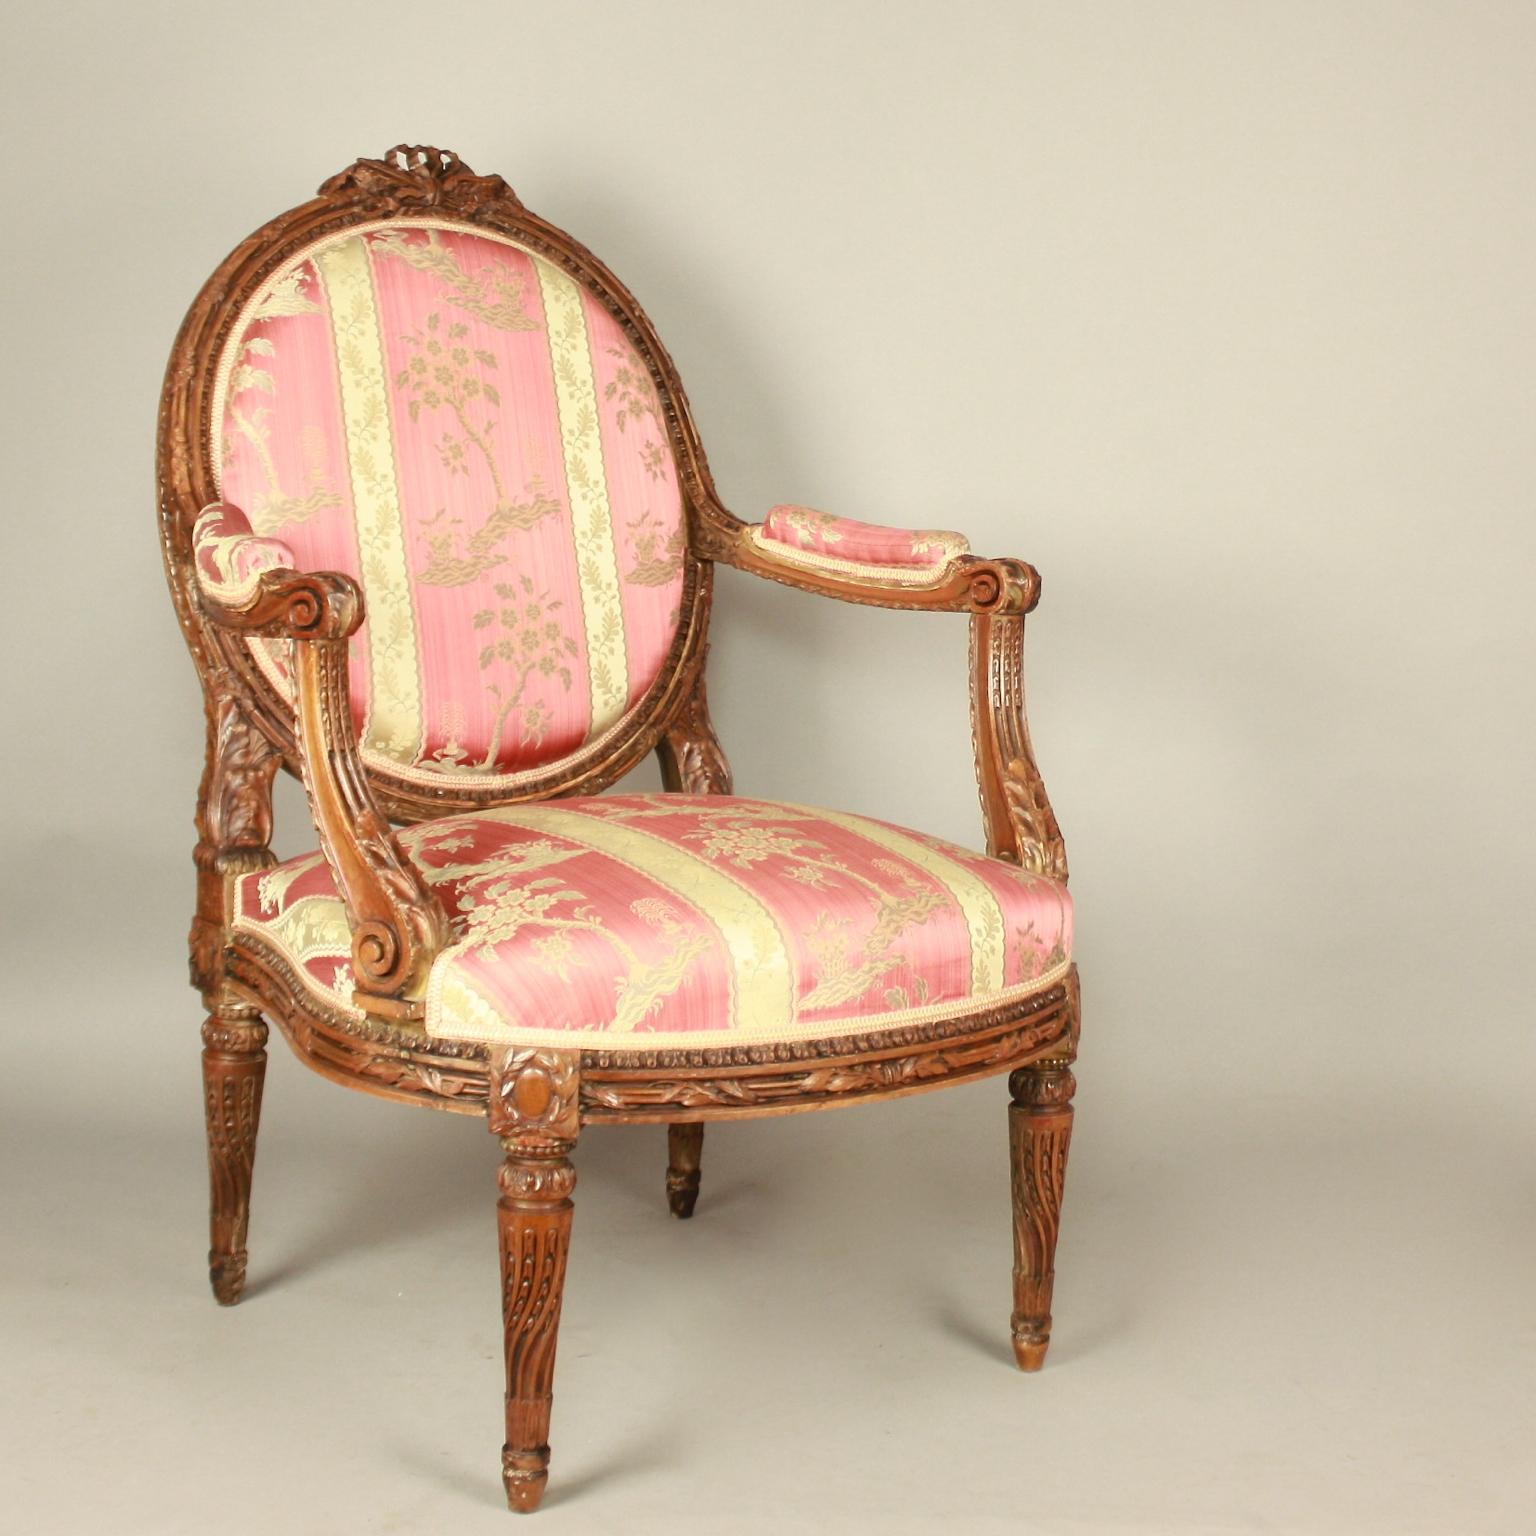 Pair of 19th Ct. Louis XVI Style Walnut Fauteuils or Armchairs after J.-R. Nadal 1